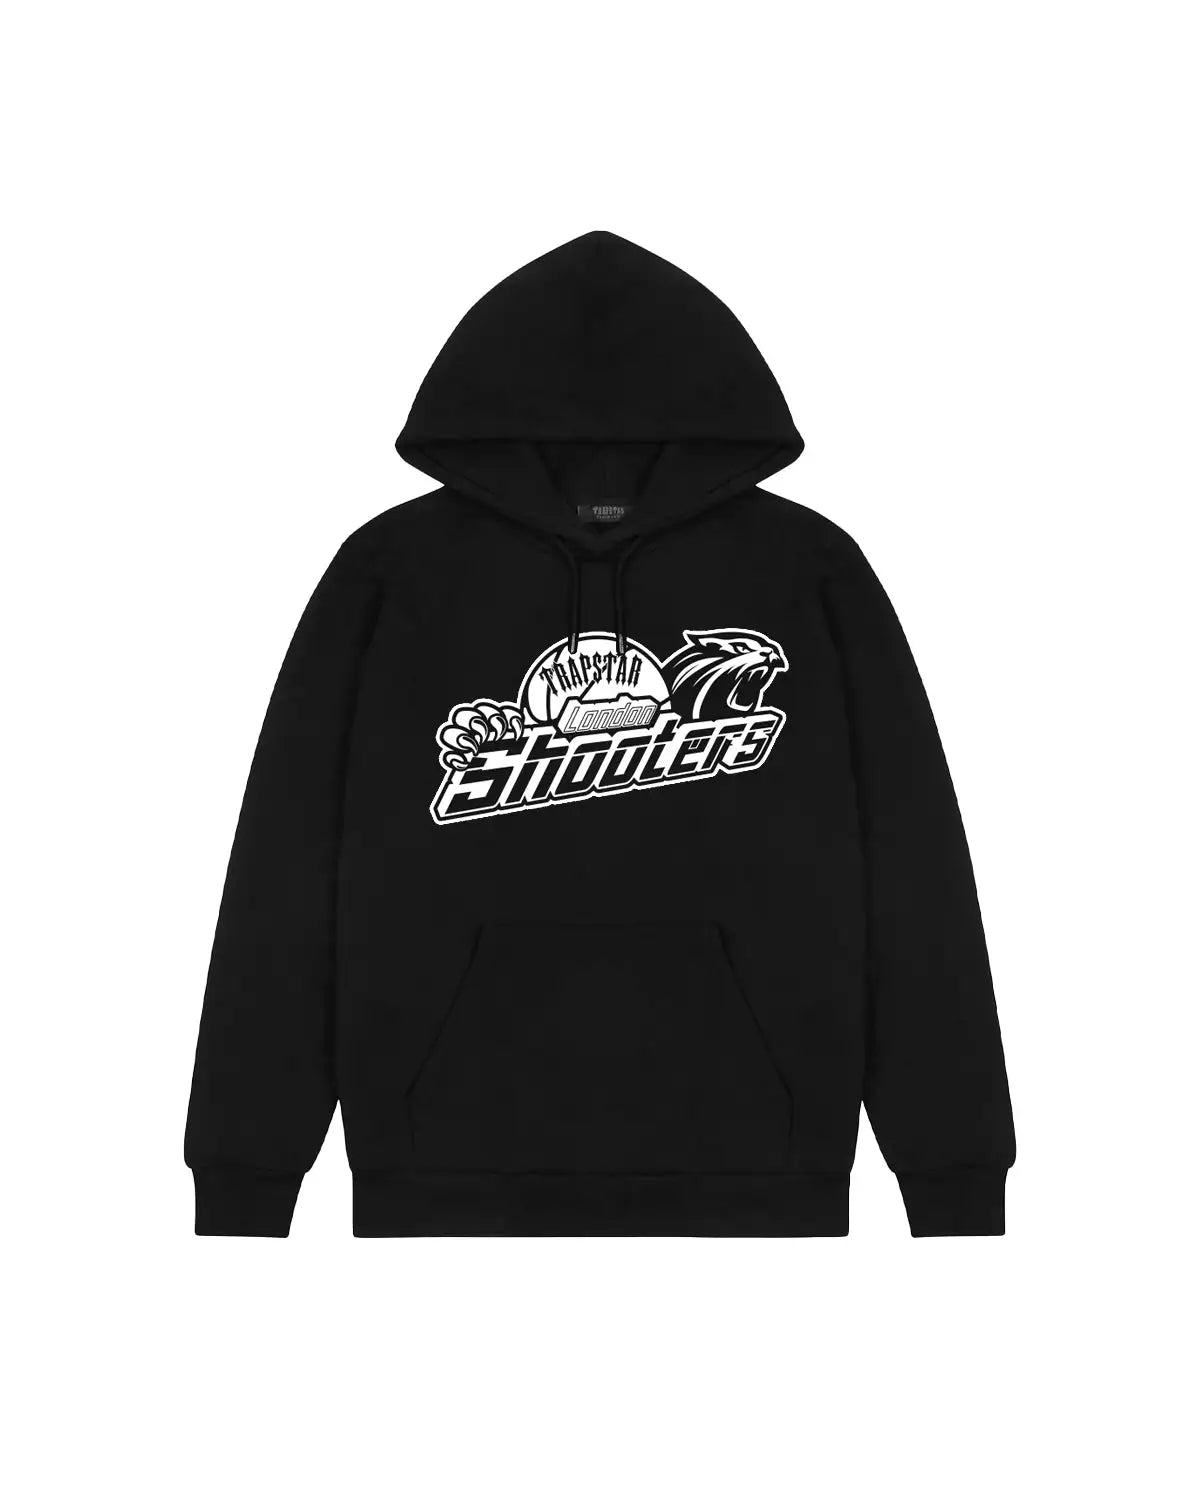 Trapstar Shooters Hoodie - Black/White